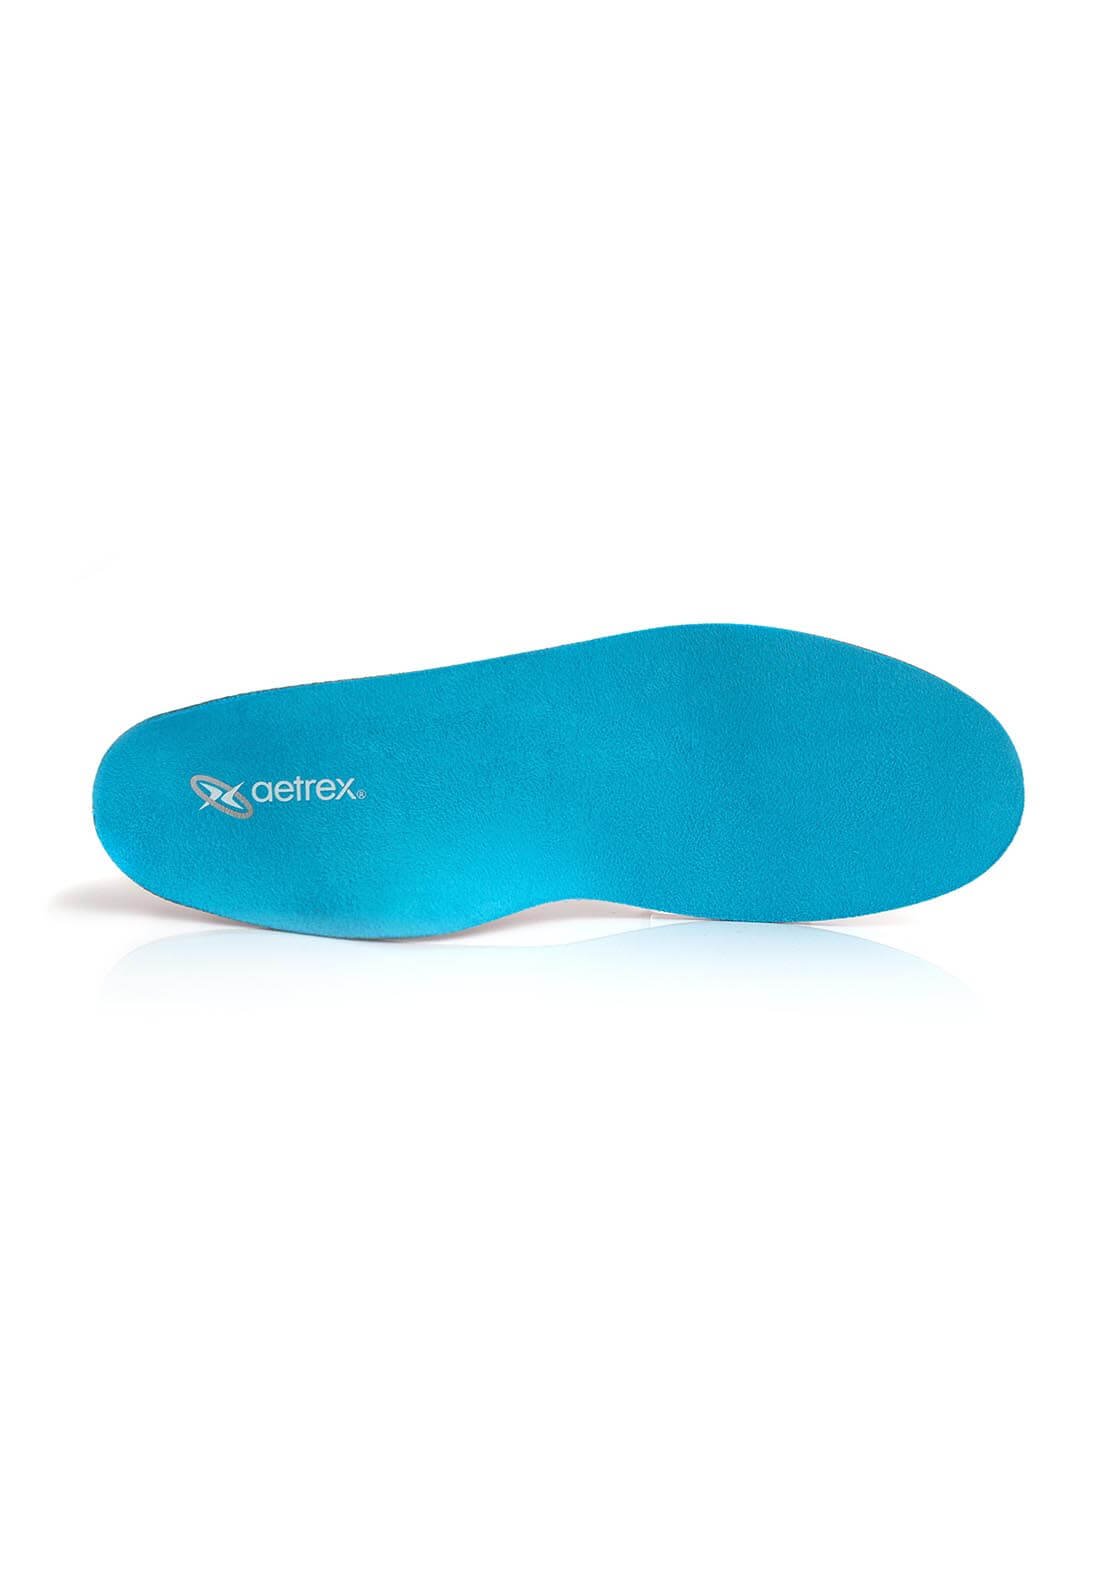 Aetrex Thinsoles Orthotics L1300 4 Shaws Department Stores